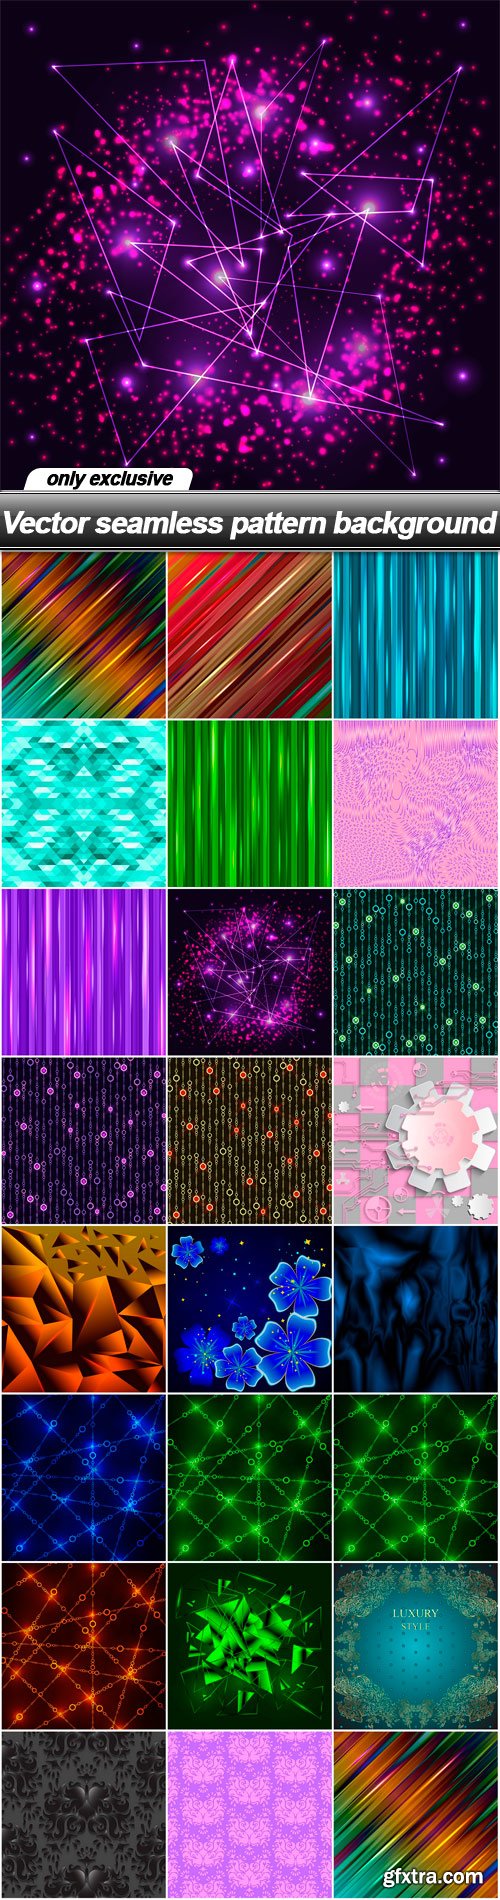 Vector seamless pattern background - 23 EPS